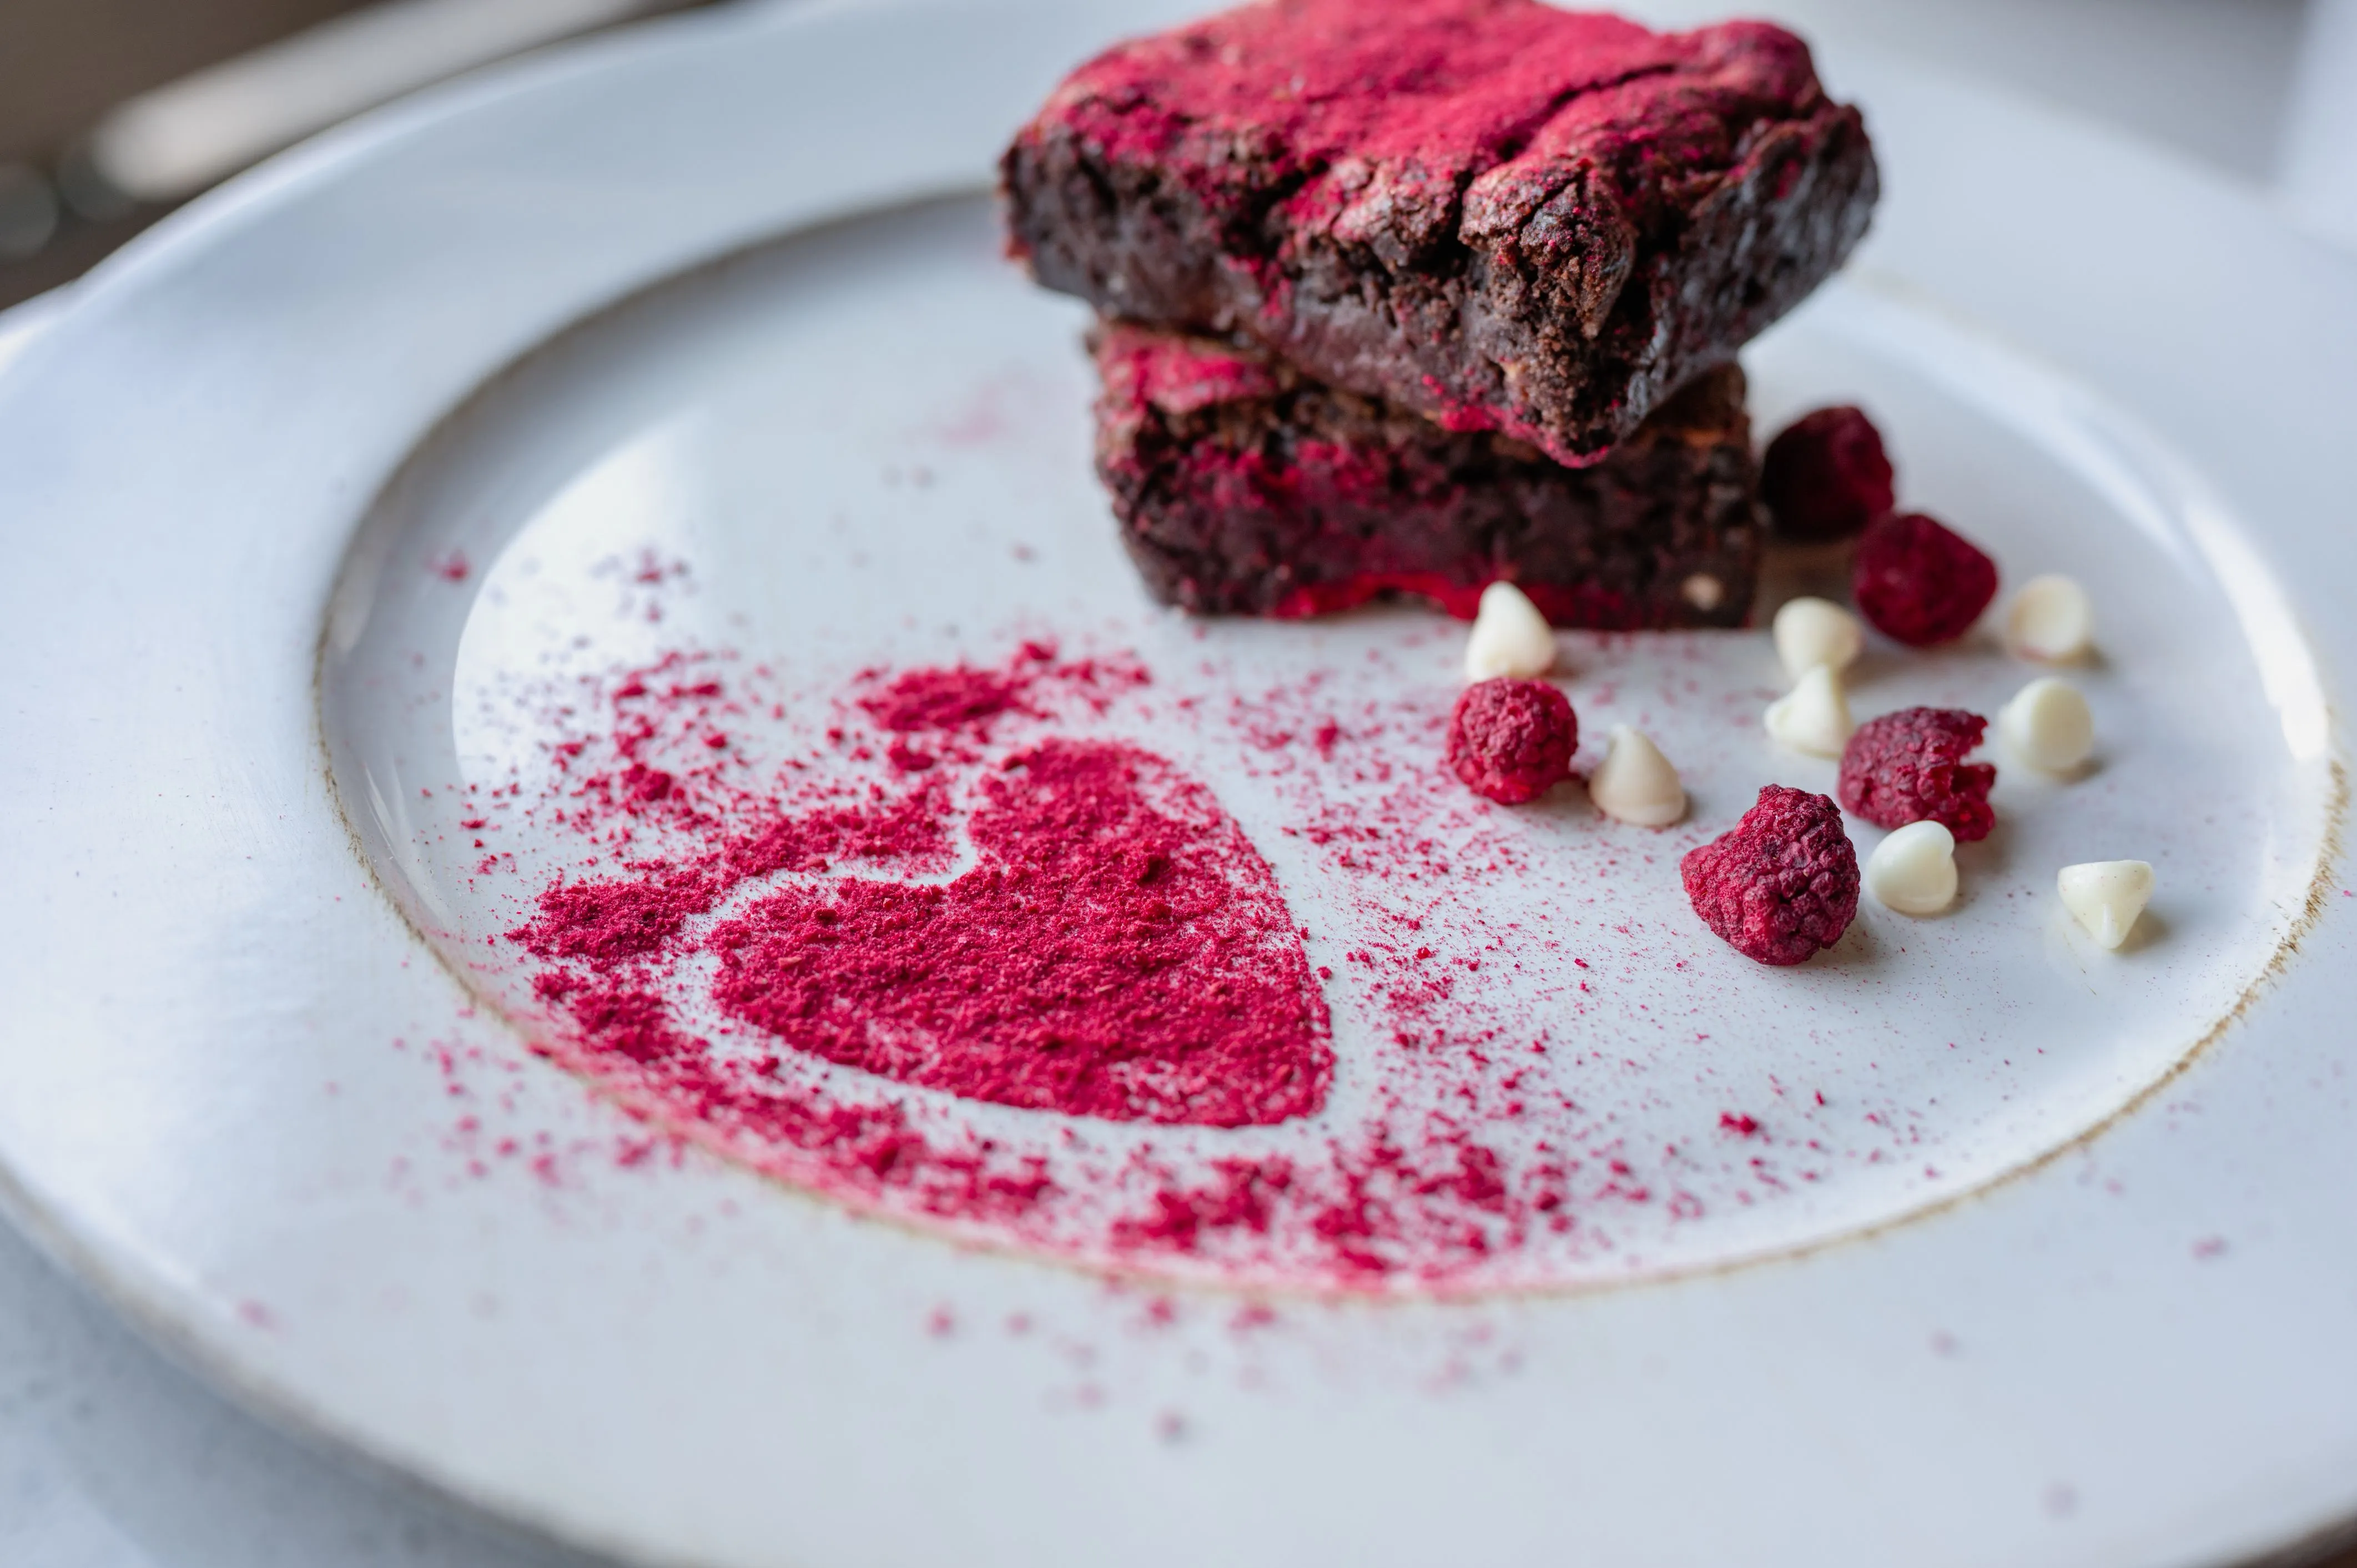 A gourmet brownie dessert elegantly presented on a white plate with a heart-shaped raspberry dusting and garnished with freeze-dried raspberries and white chocolate chips.